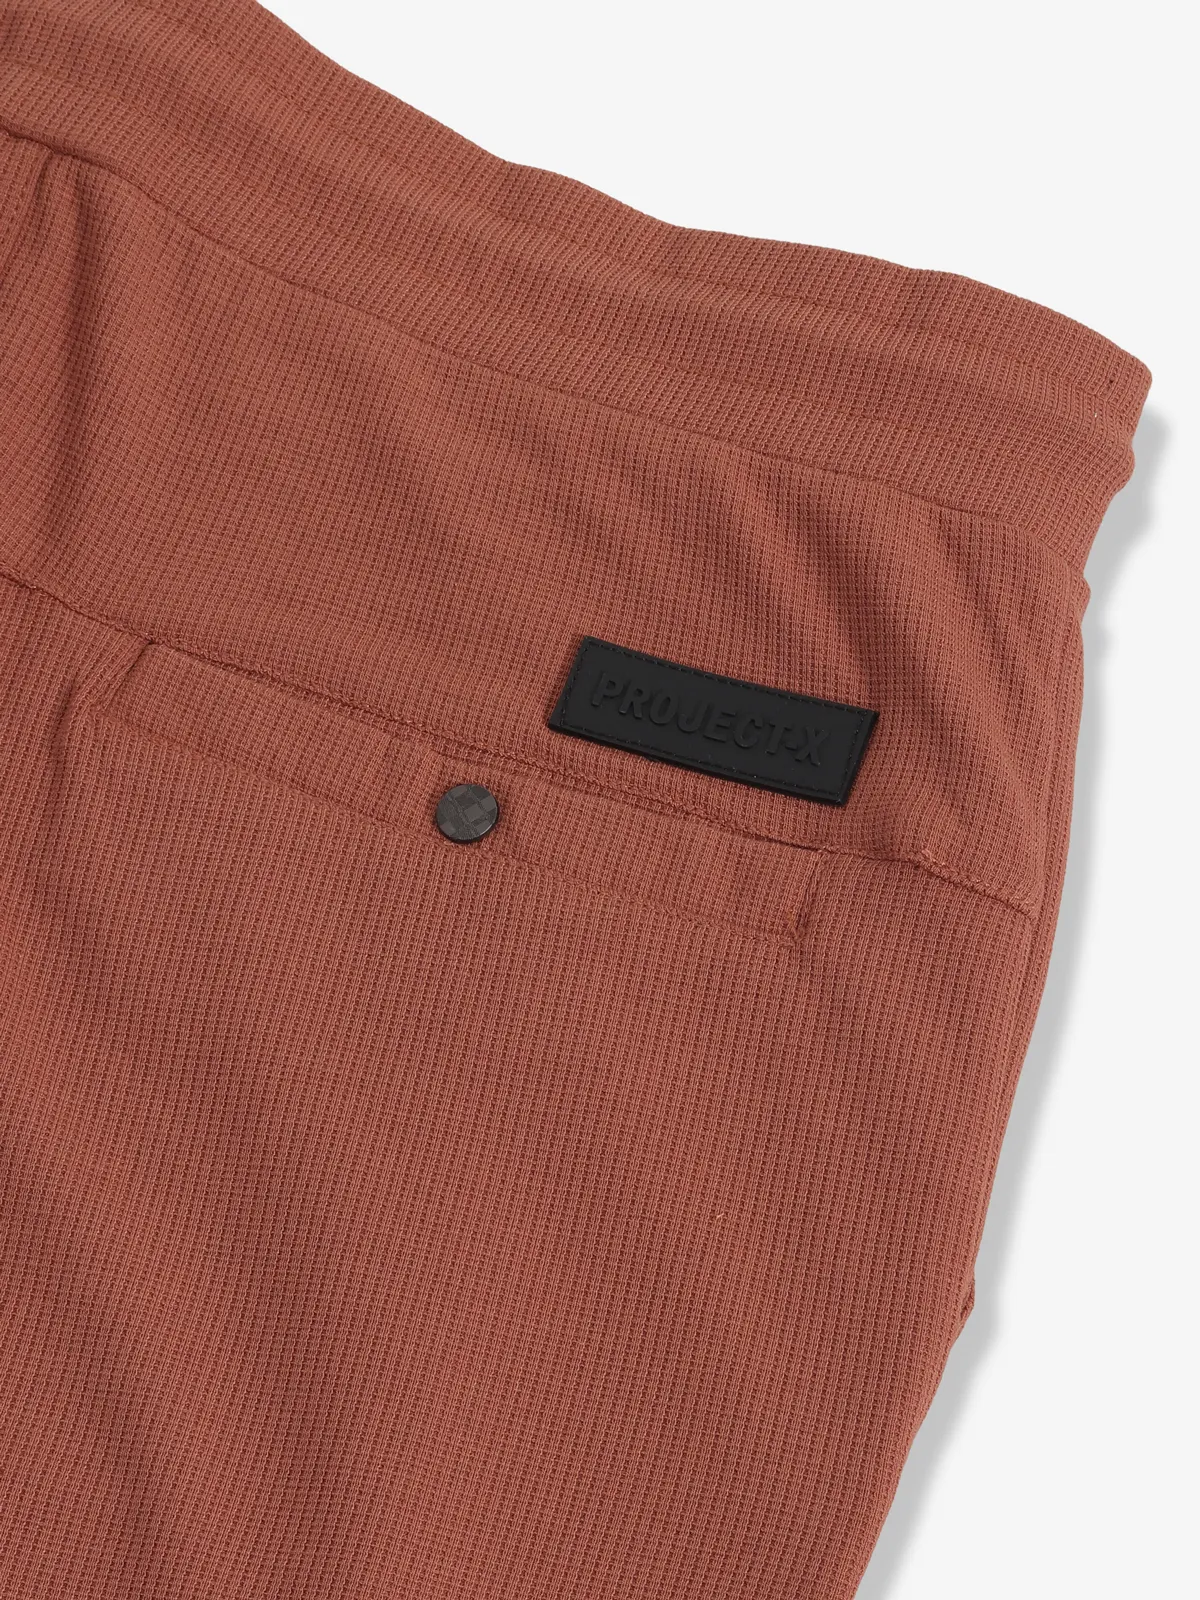 GS78 brown cotton solid track pant